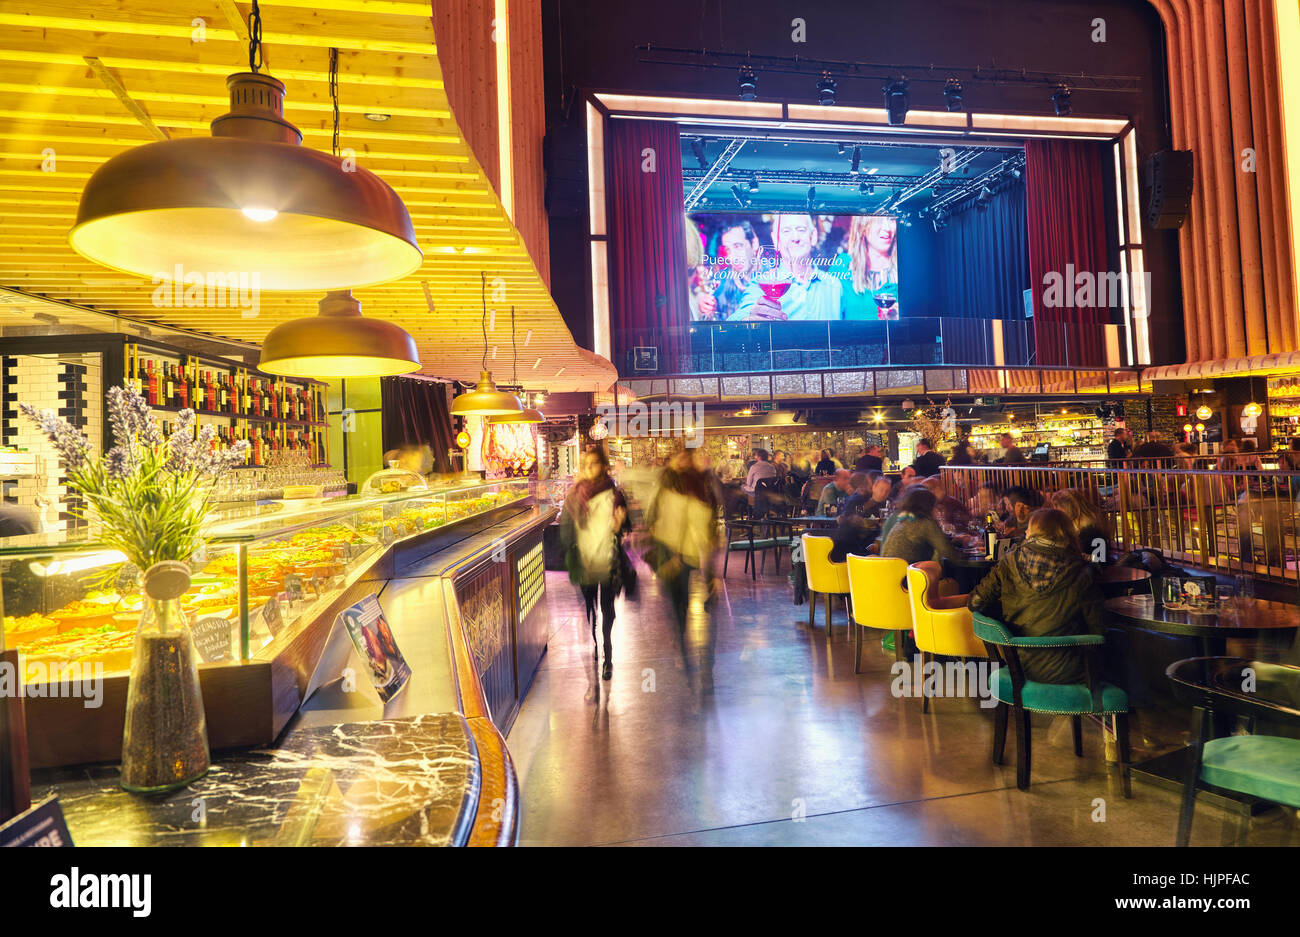 Platea Madrid, a gourmet food hall located in a former cinema on the Plaza  de Colon. Madrid, Spain Stock Photo - Alamy